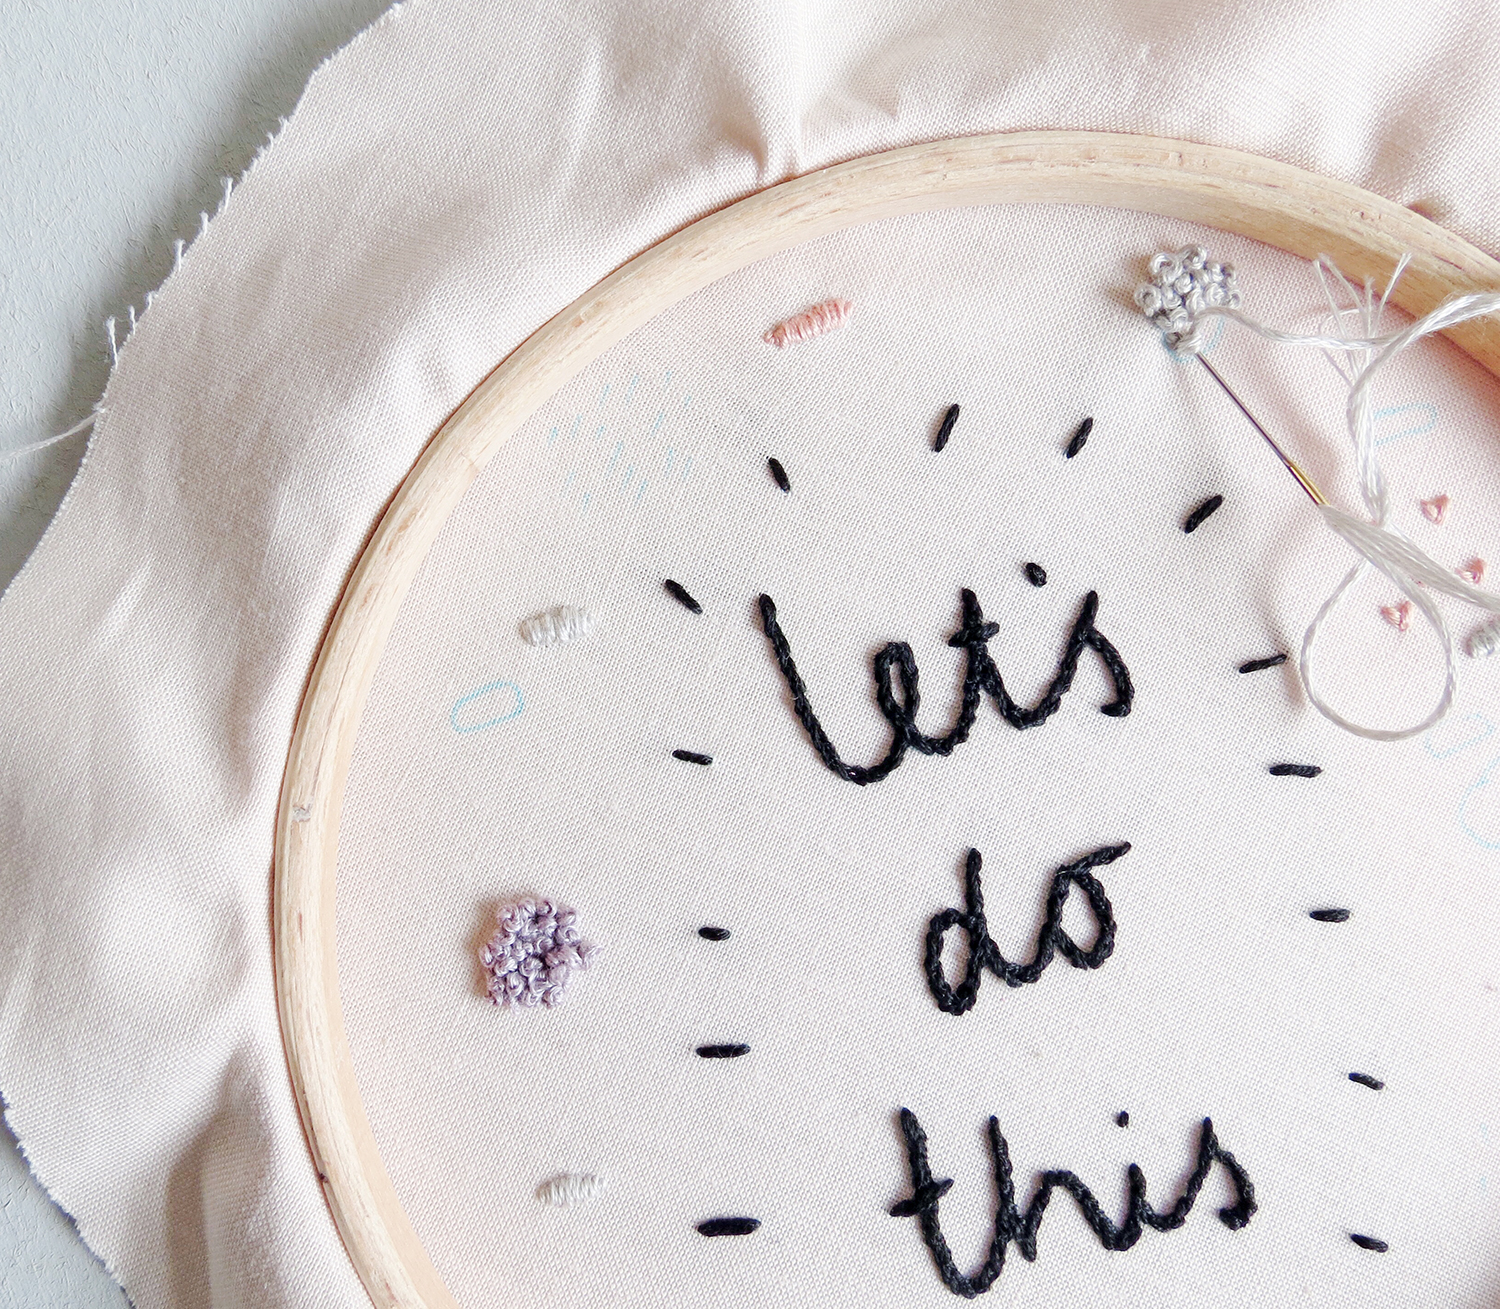 How to make a slogan embroidery hoop step 3